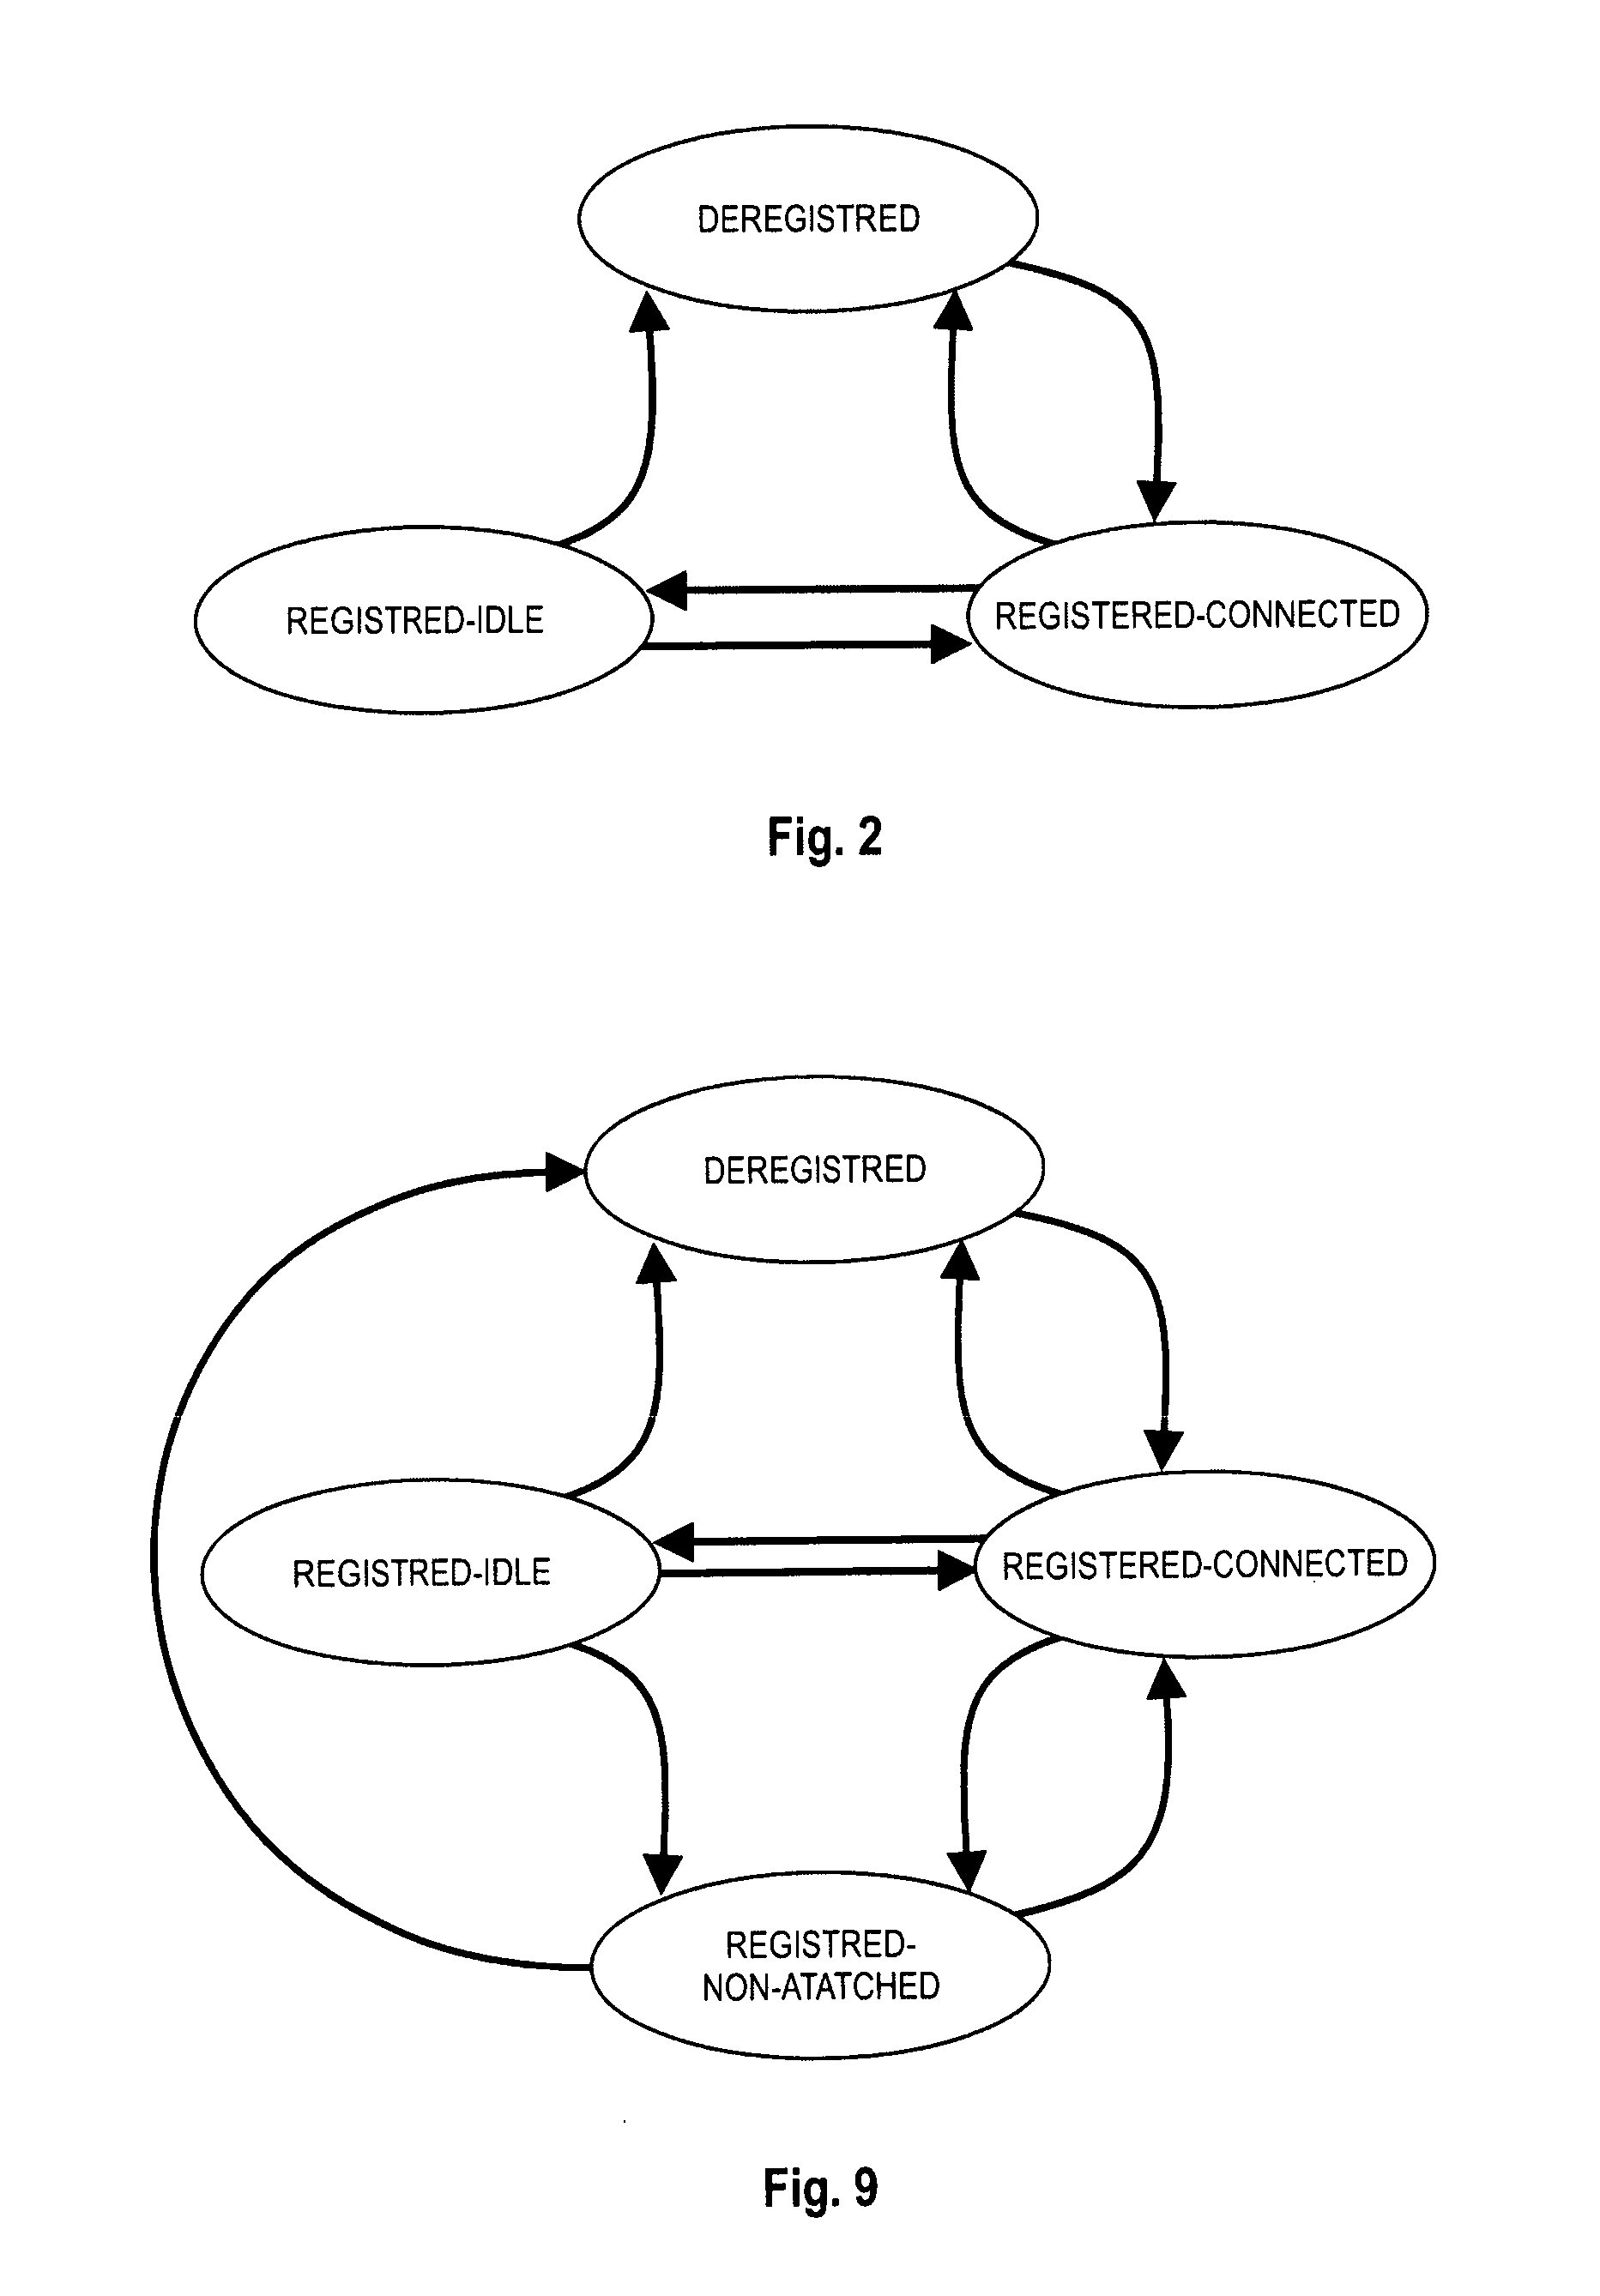 Enhanced attachment procedure for attaching a UE to a 3GPP access network